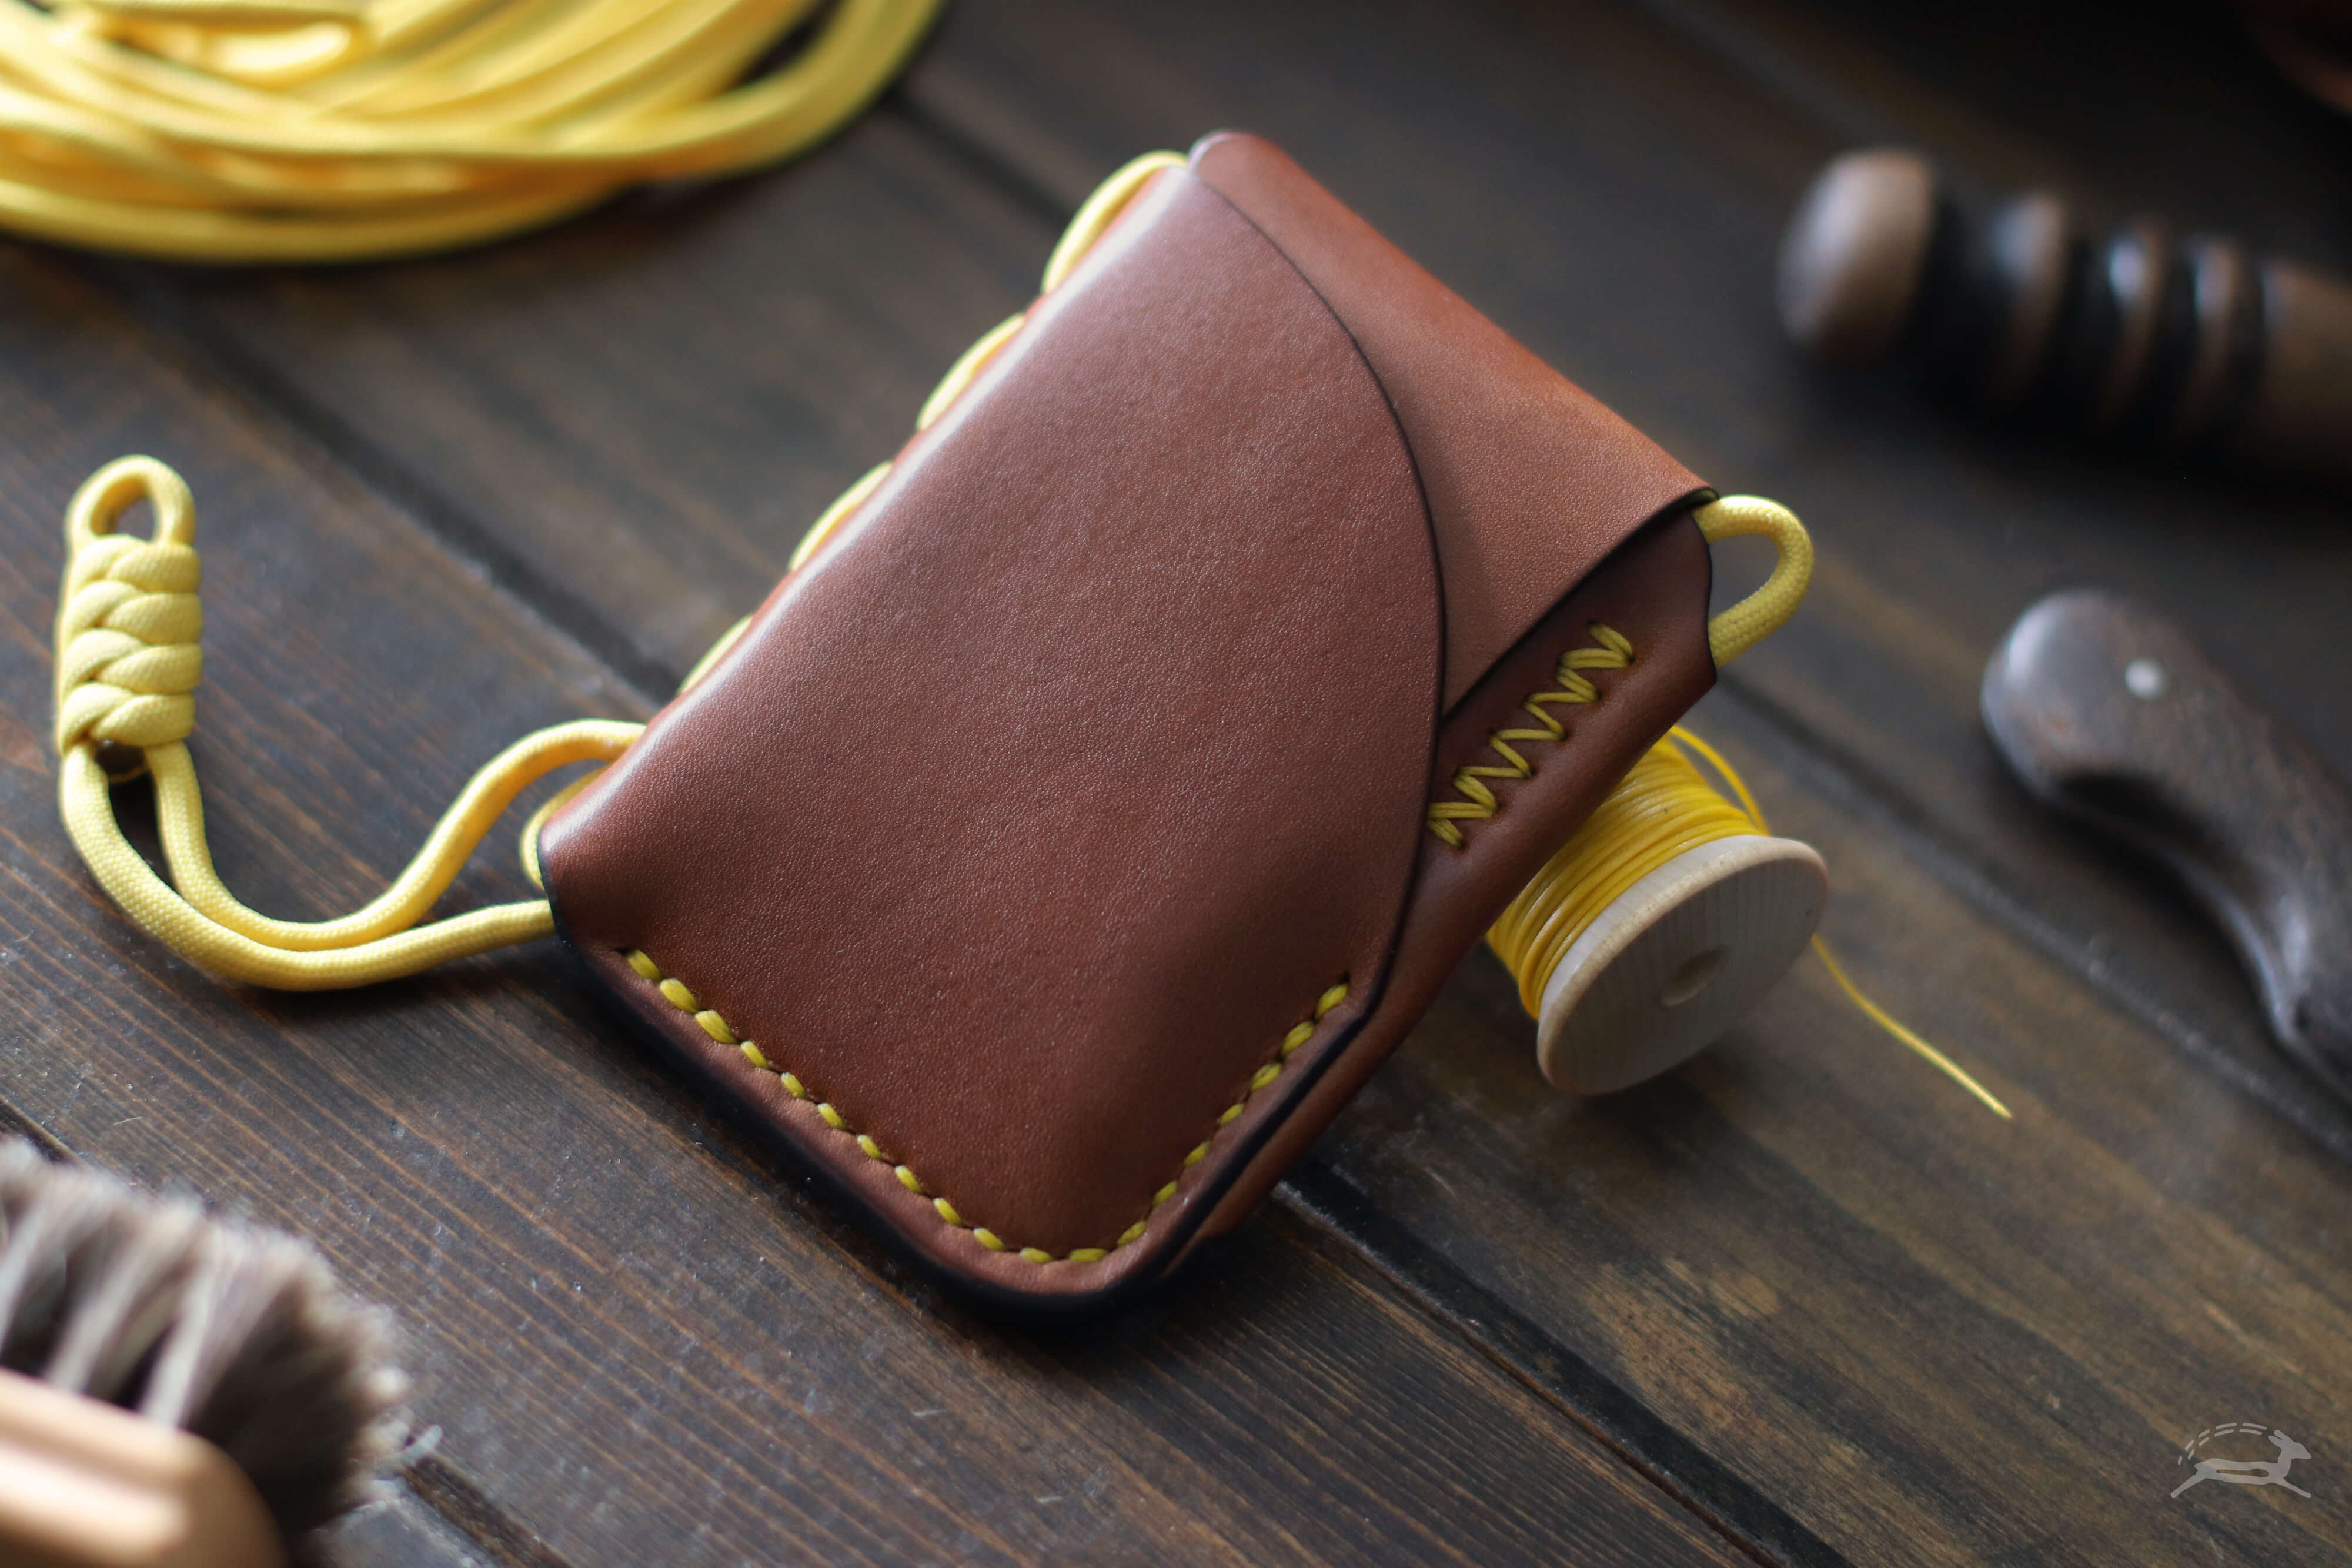 Tan Leather wallet with bright yellow stitching - OCHRE handcrafted